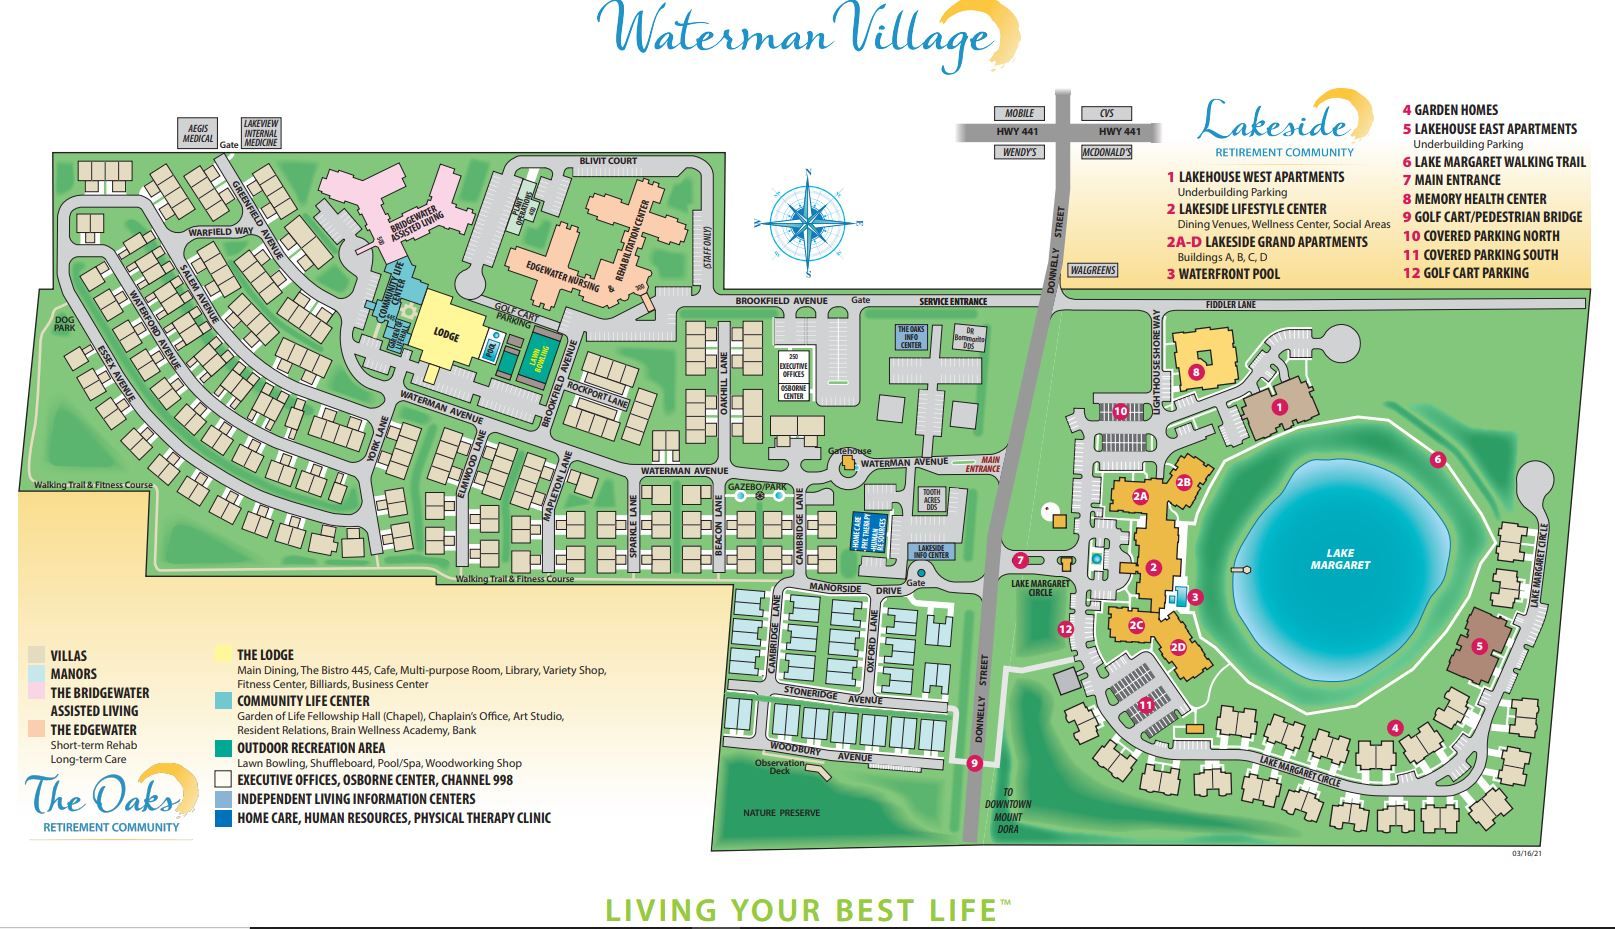 The Oaks at Waterman Village Retirement Community and Lakeside at Waterman Village Retirement Community, are connected by a covered golf cart/pedestrian bridge over Donnelly Street.